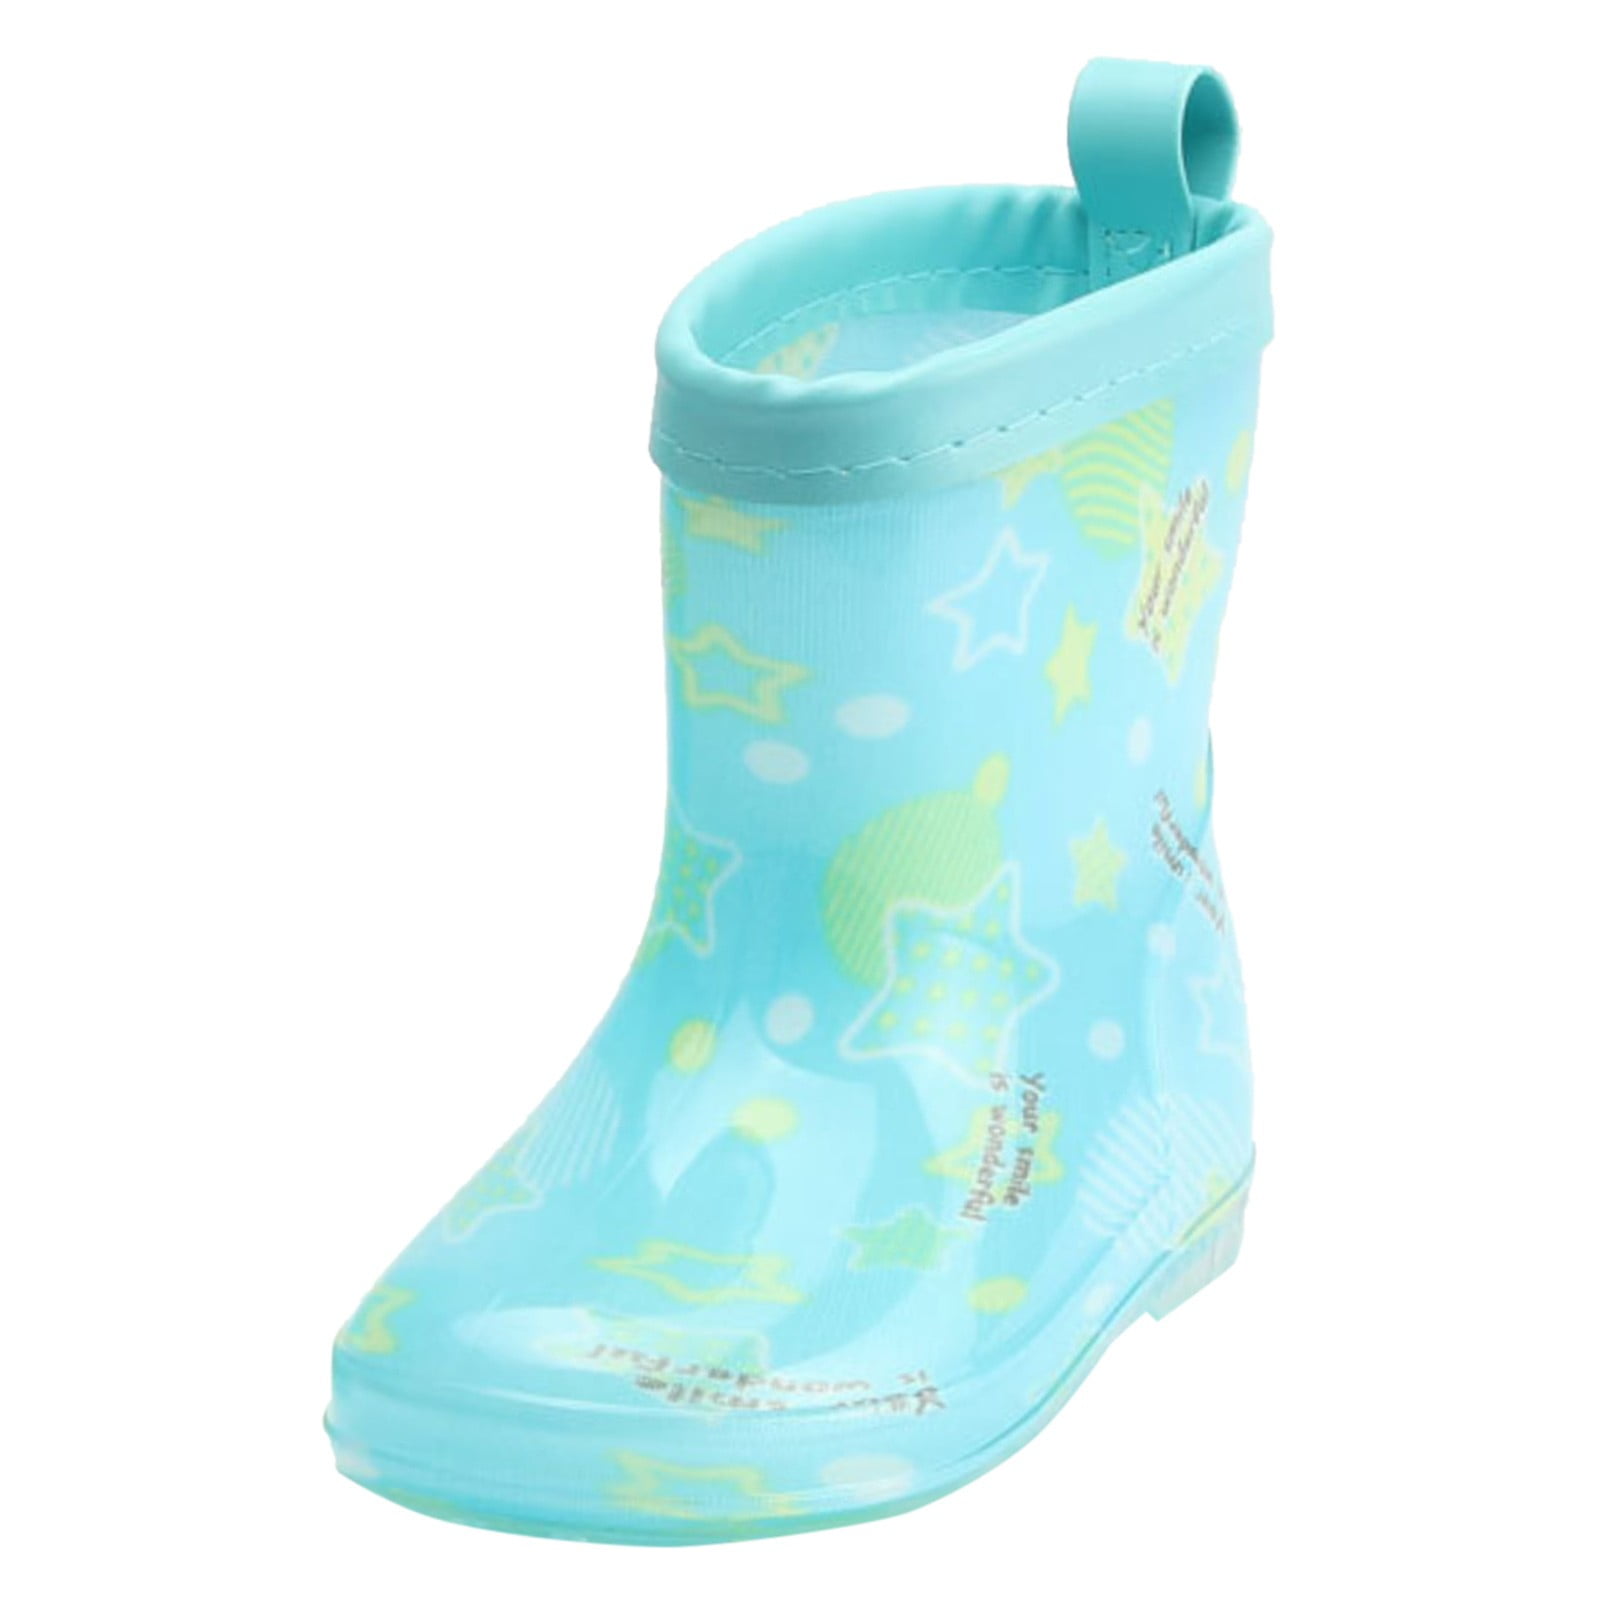 Toddler Rain Boots Short Rain Boots Easy On Lightweight Baby Daily ...